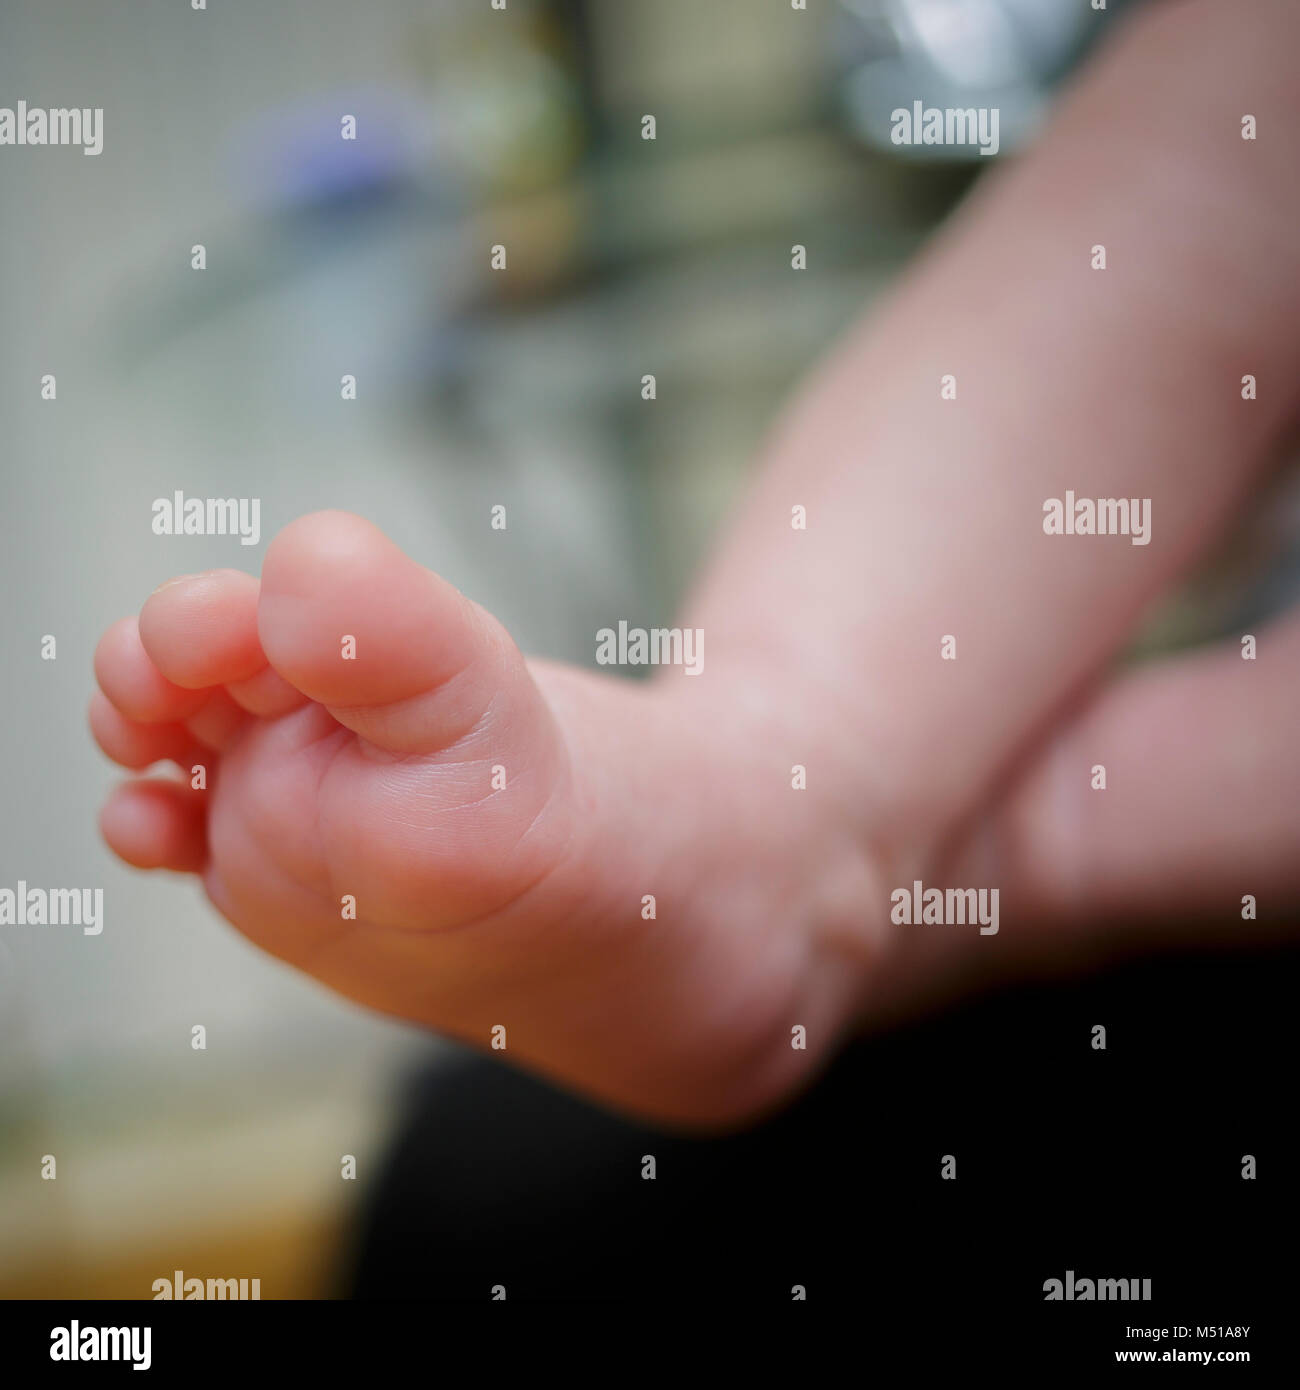 Feet of newborn baby in the hand of mother. Sweet baby's feet Stock Photo